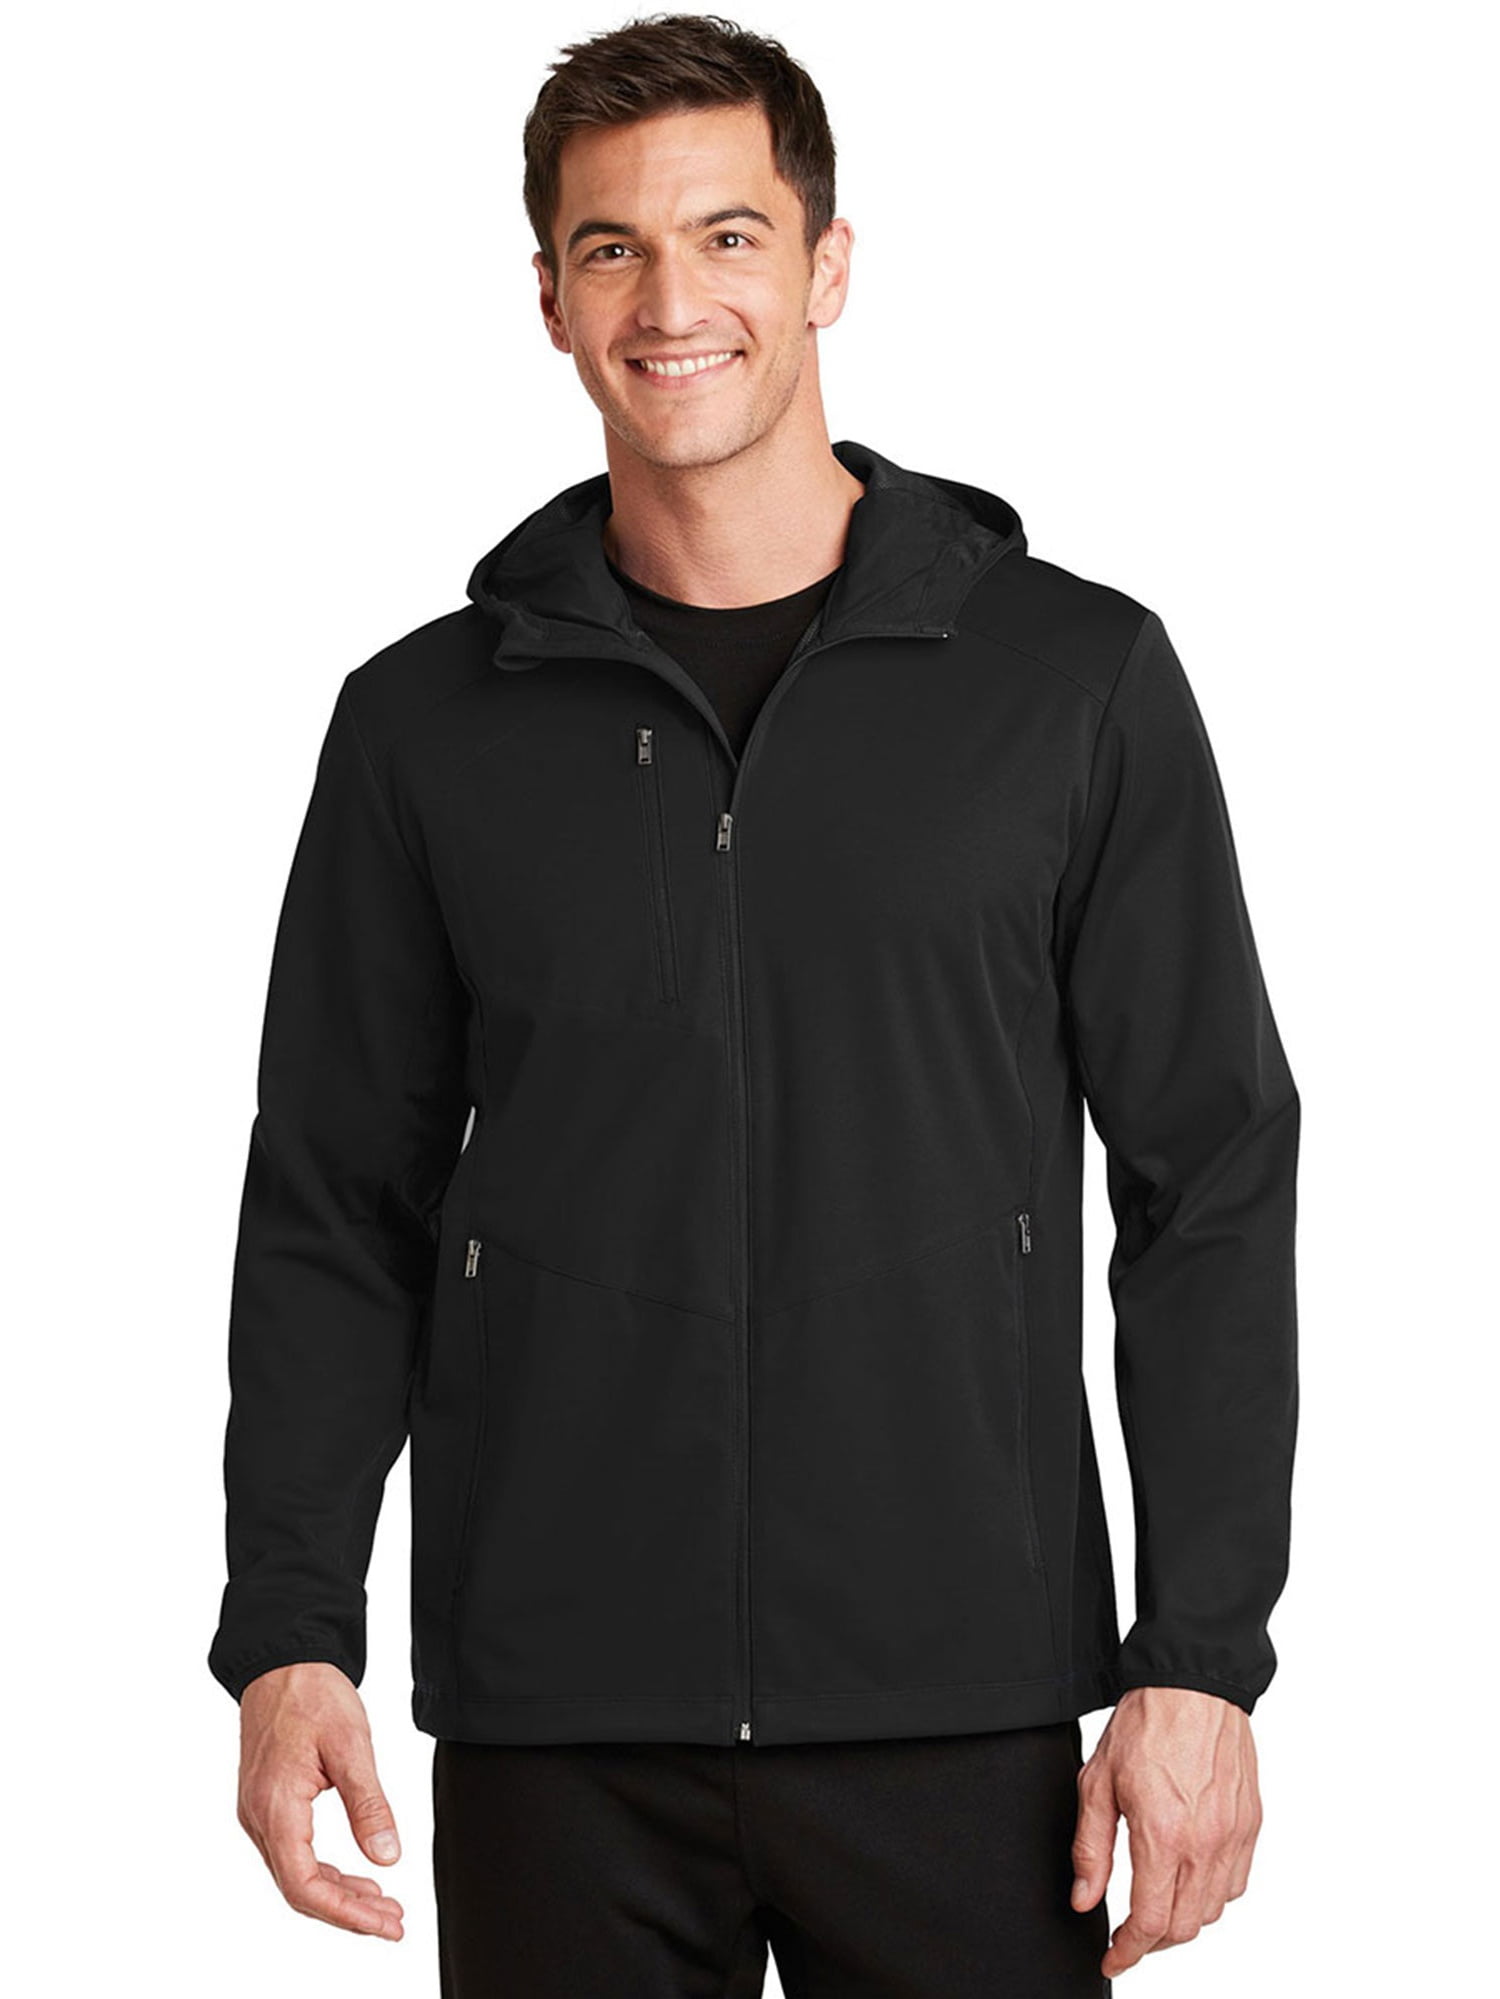 Port Authority - Port Authority J719 Mens Active Hooded Soft Shell ...